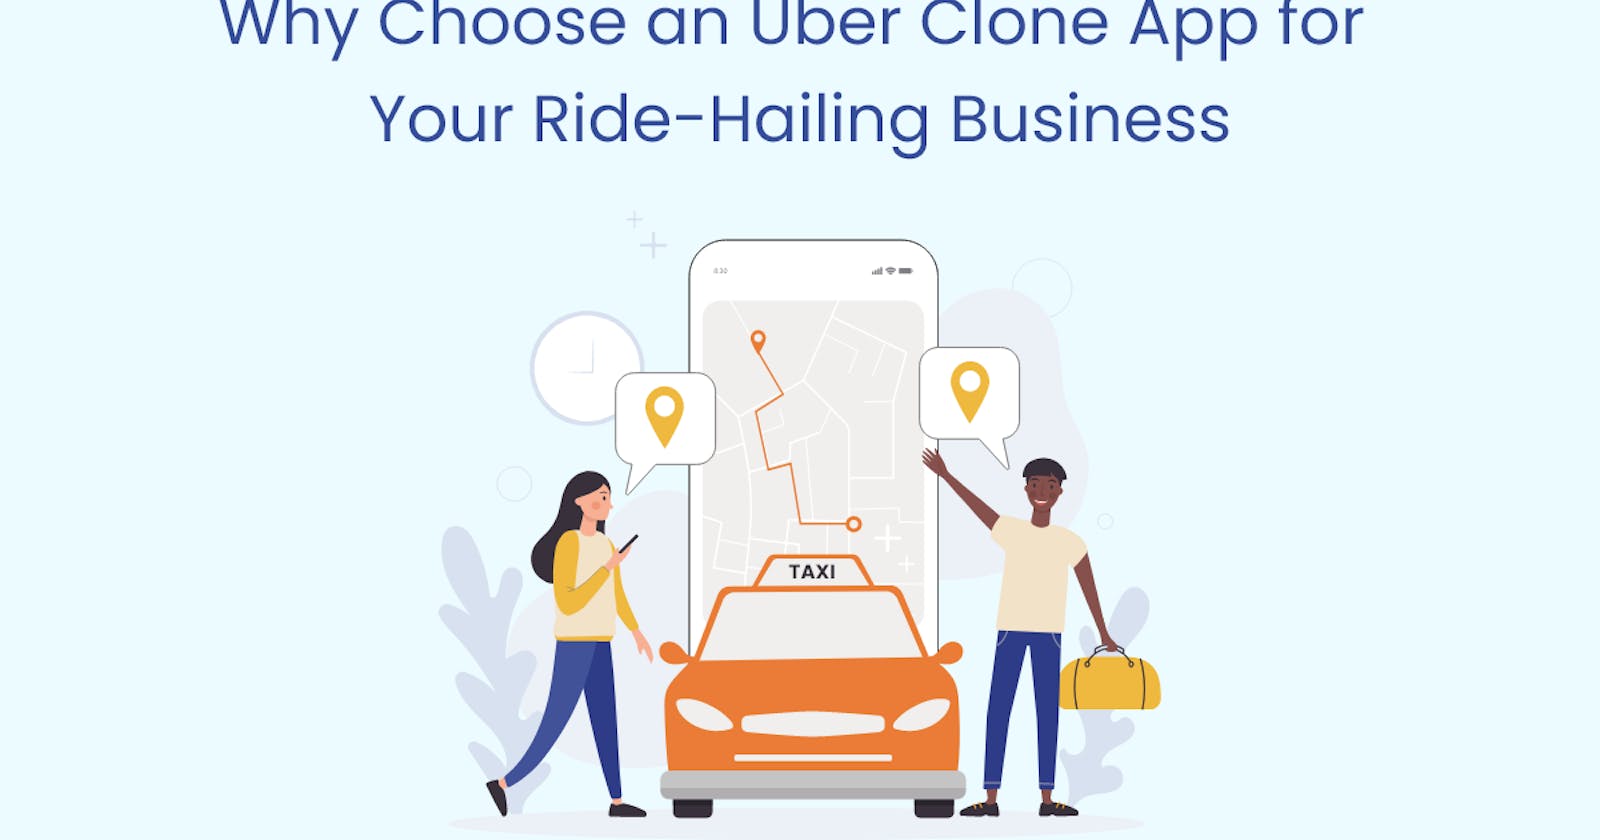 Why Choose an Uber Clone App for Your Ride-Hailing Business